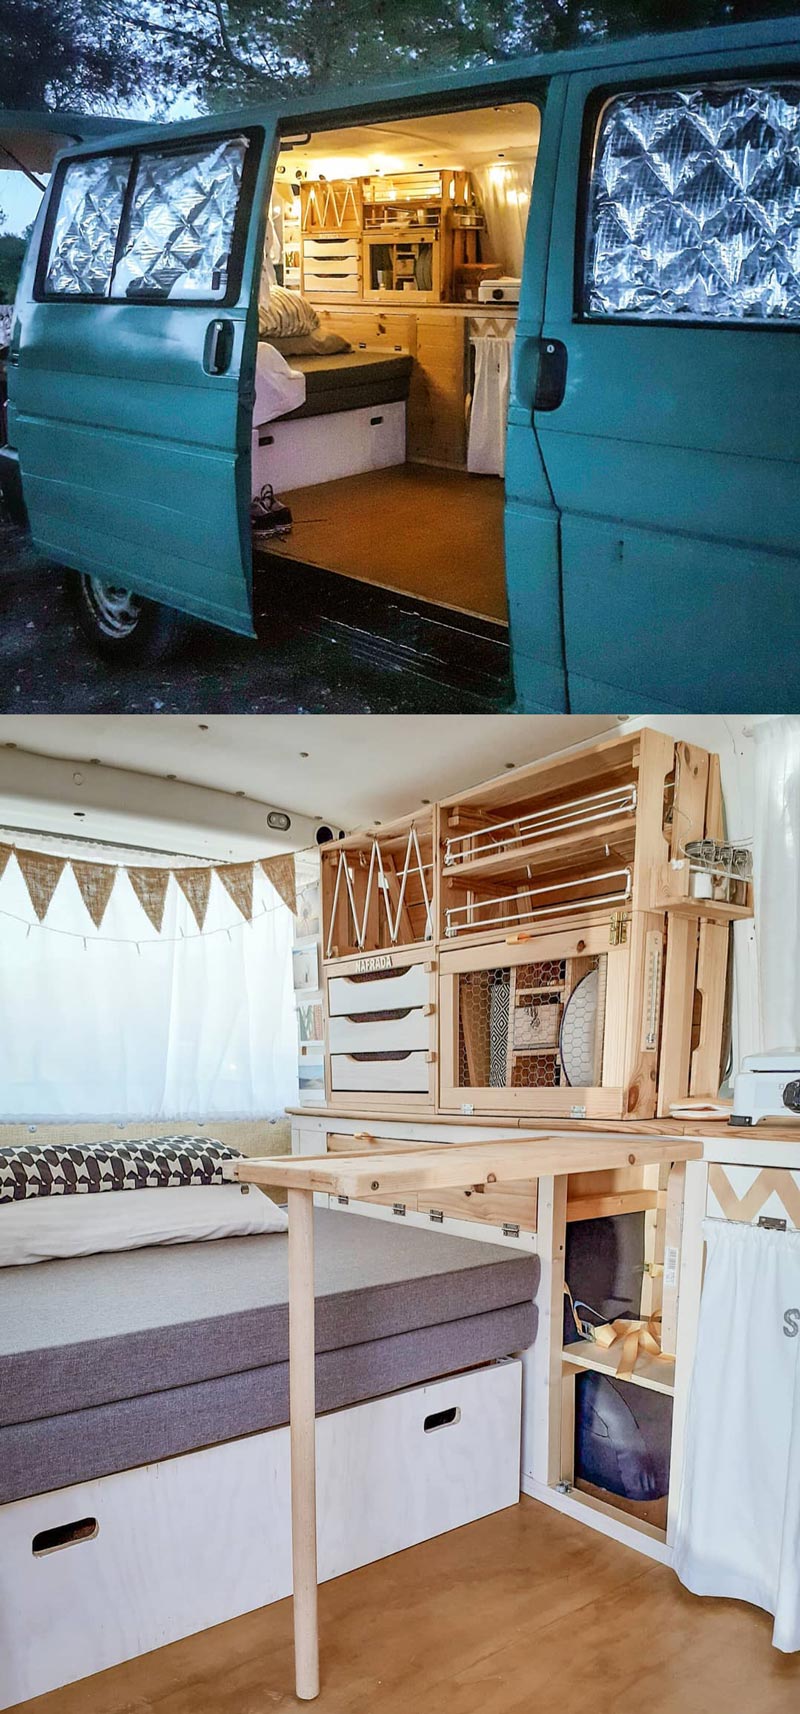 Besparing omverwerping slachtoffers 8 Amazing Minivan Camper Conversions » Living In A Van On A Buget